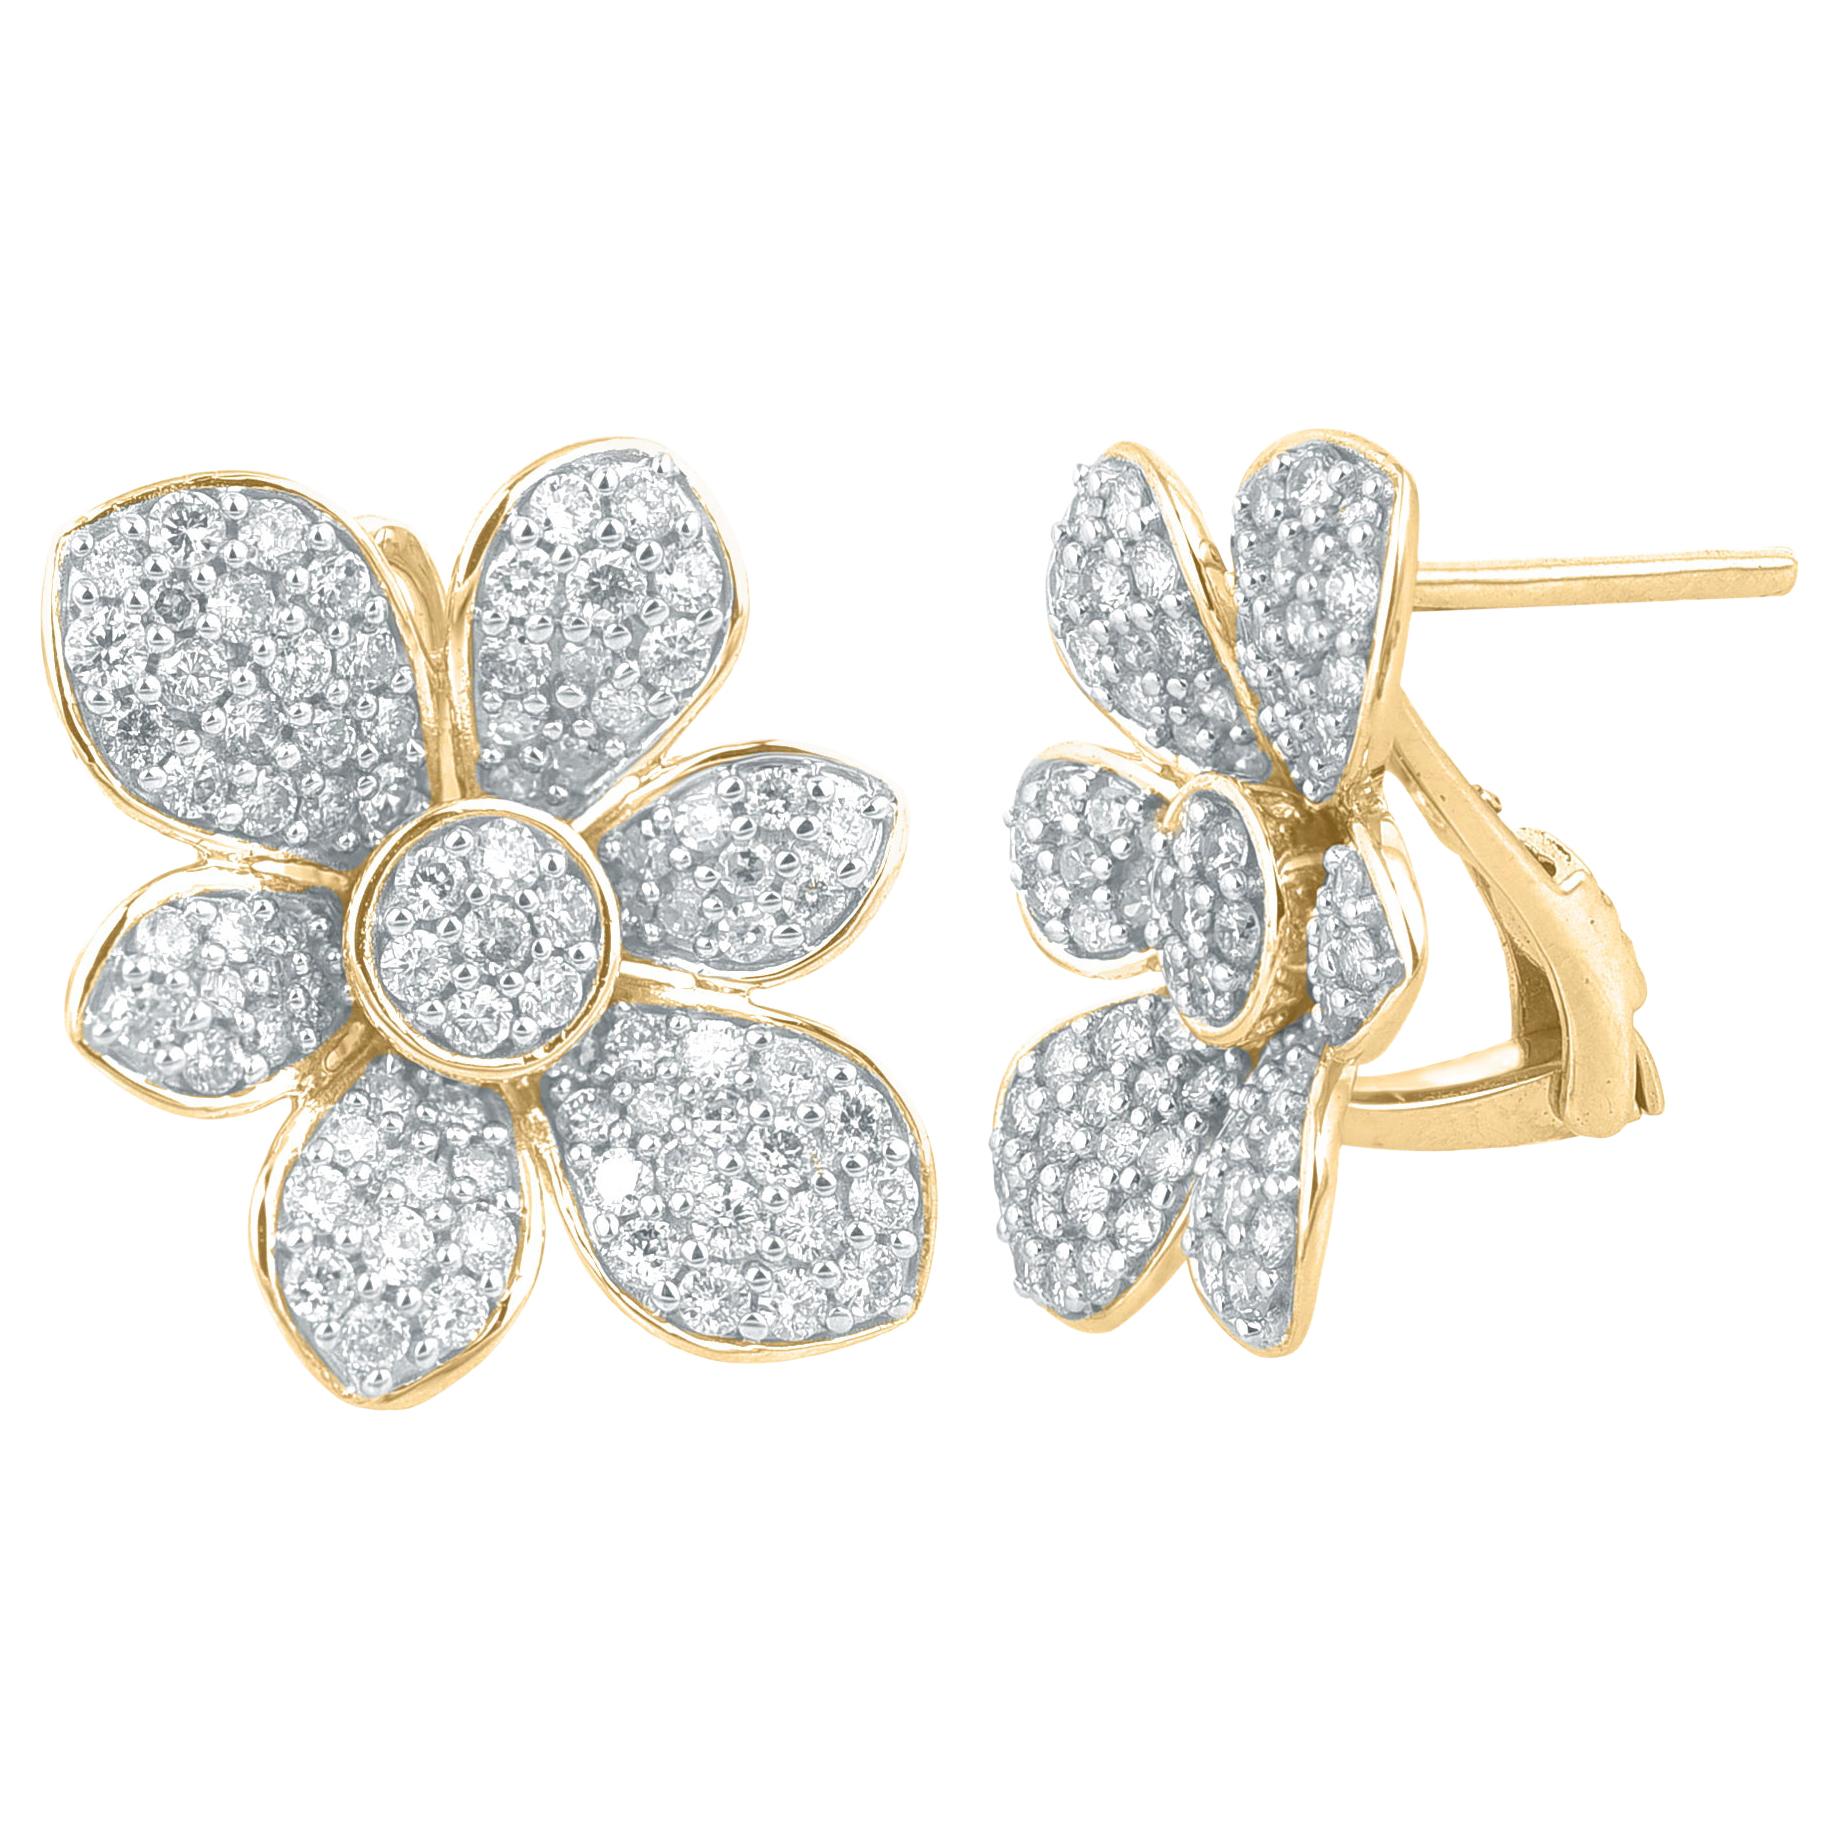 TJD 1.50 Carat Round 14K Yellow Gold Floral Petals Cluster Design Stud Earrings